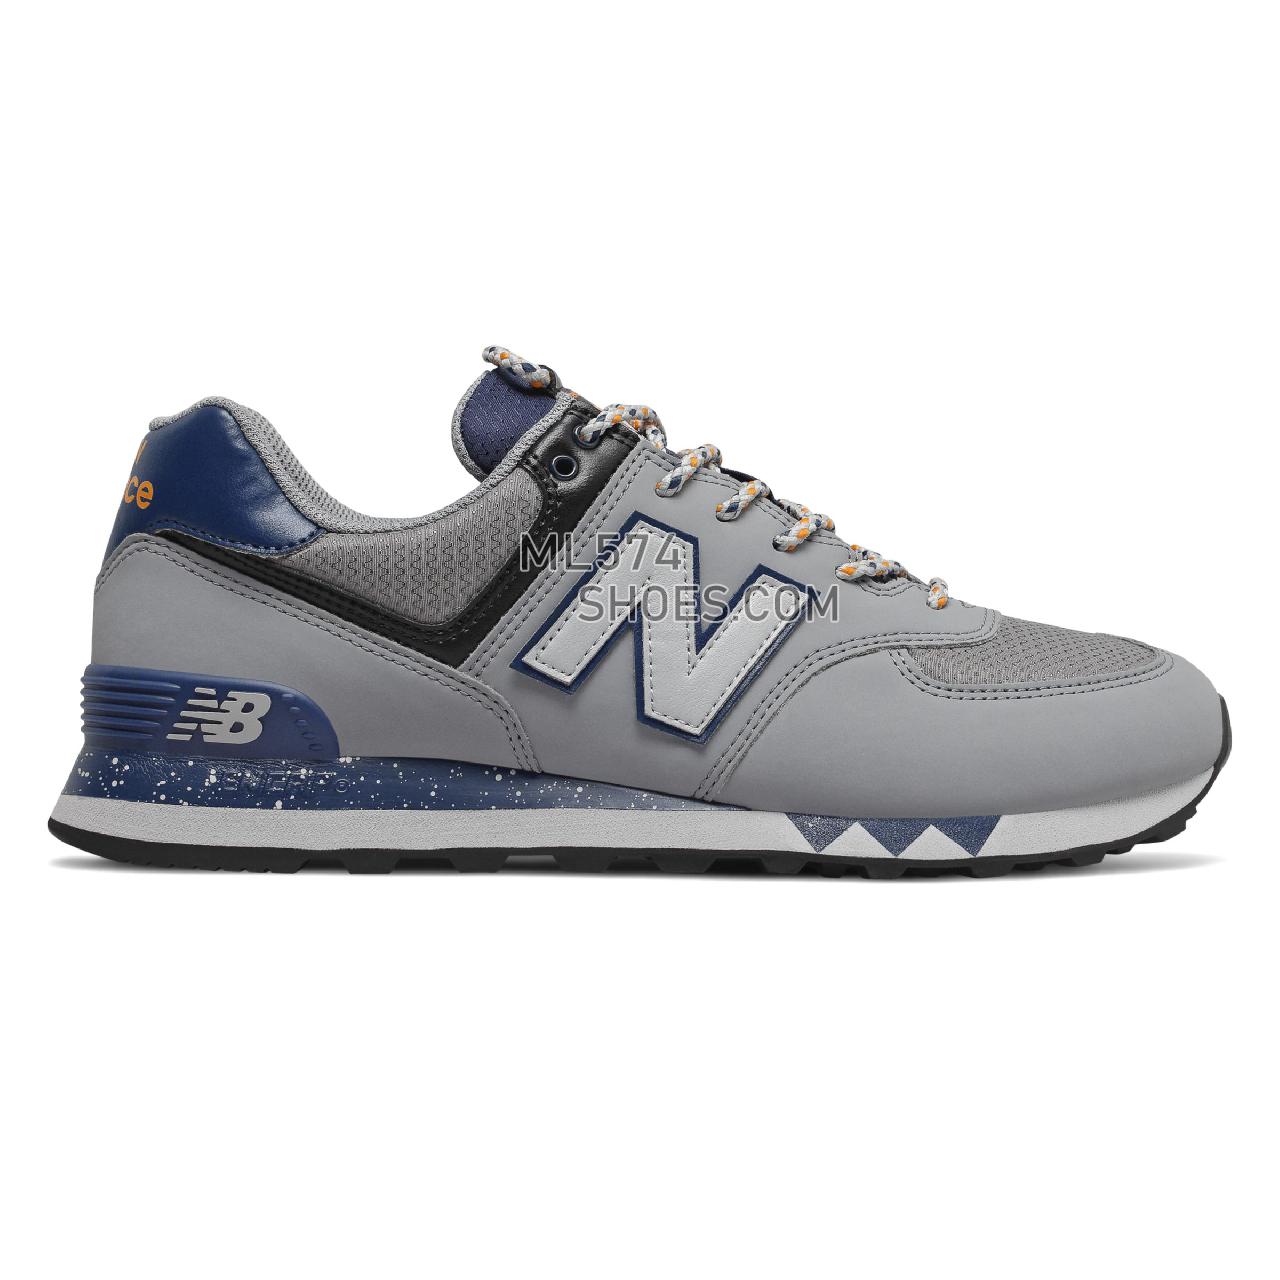 New Balance 574 - Men's Classic Sneakers - Steel with Moroccan Tile - ML574NFJ